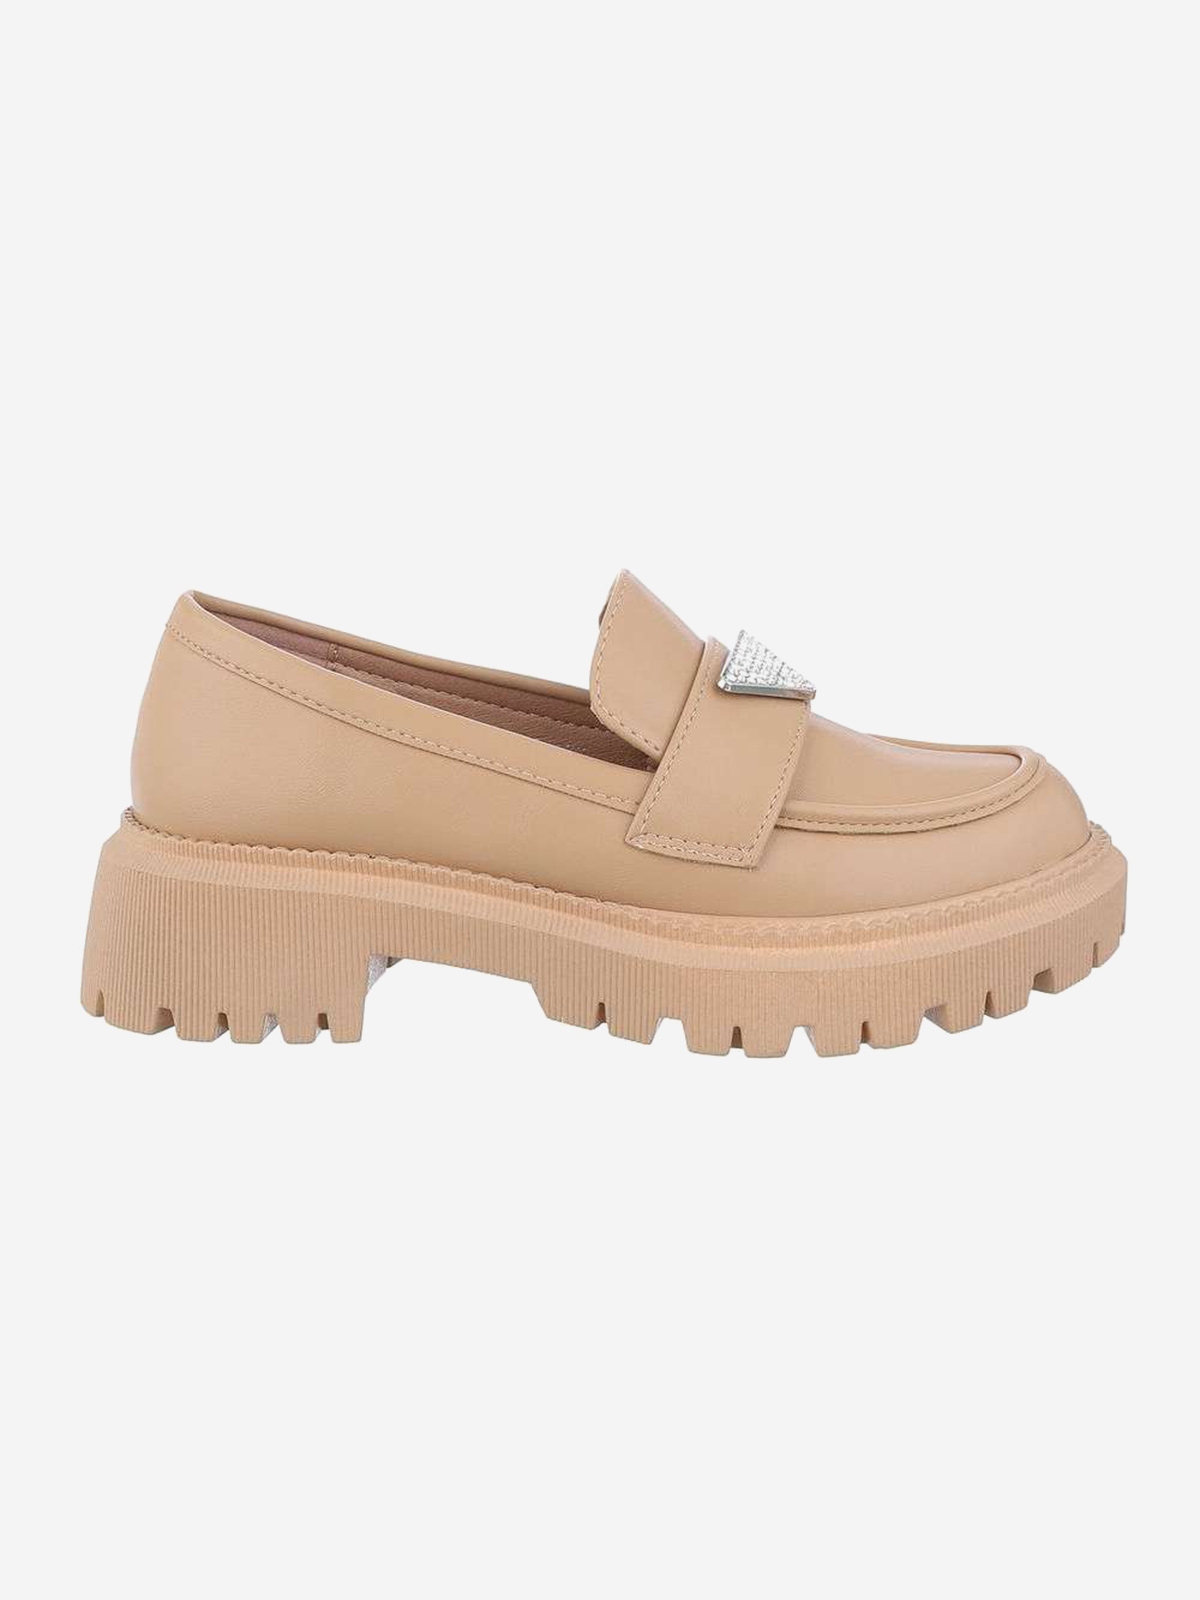 Women's loafers in beige with a decorative accent on the front